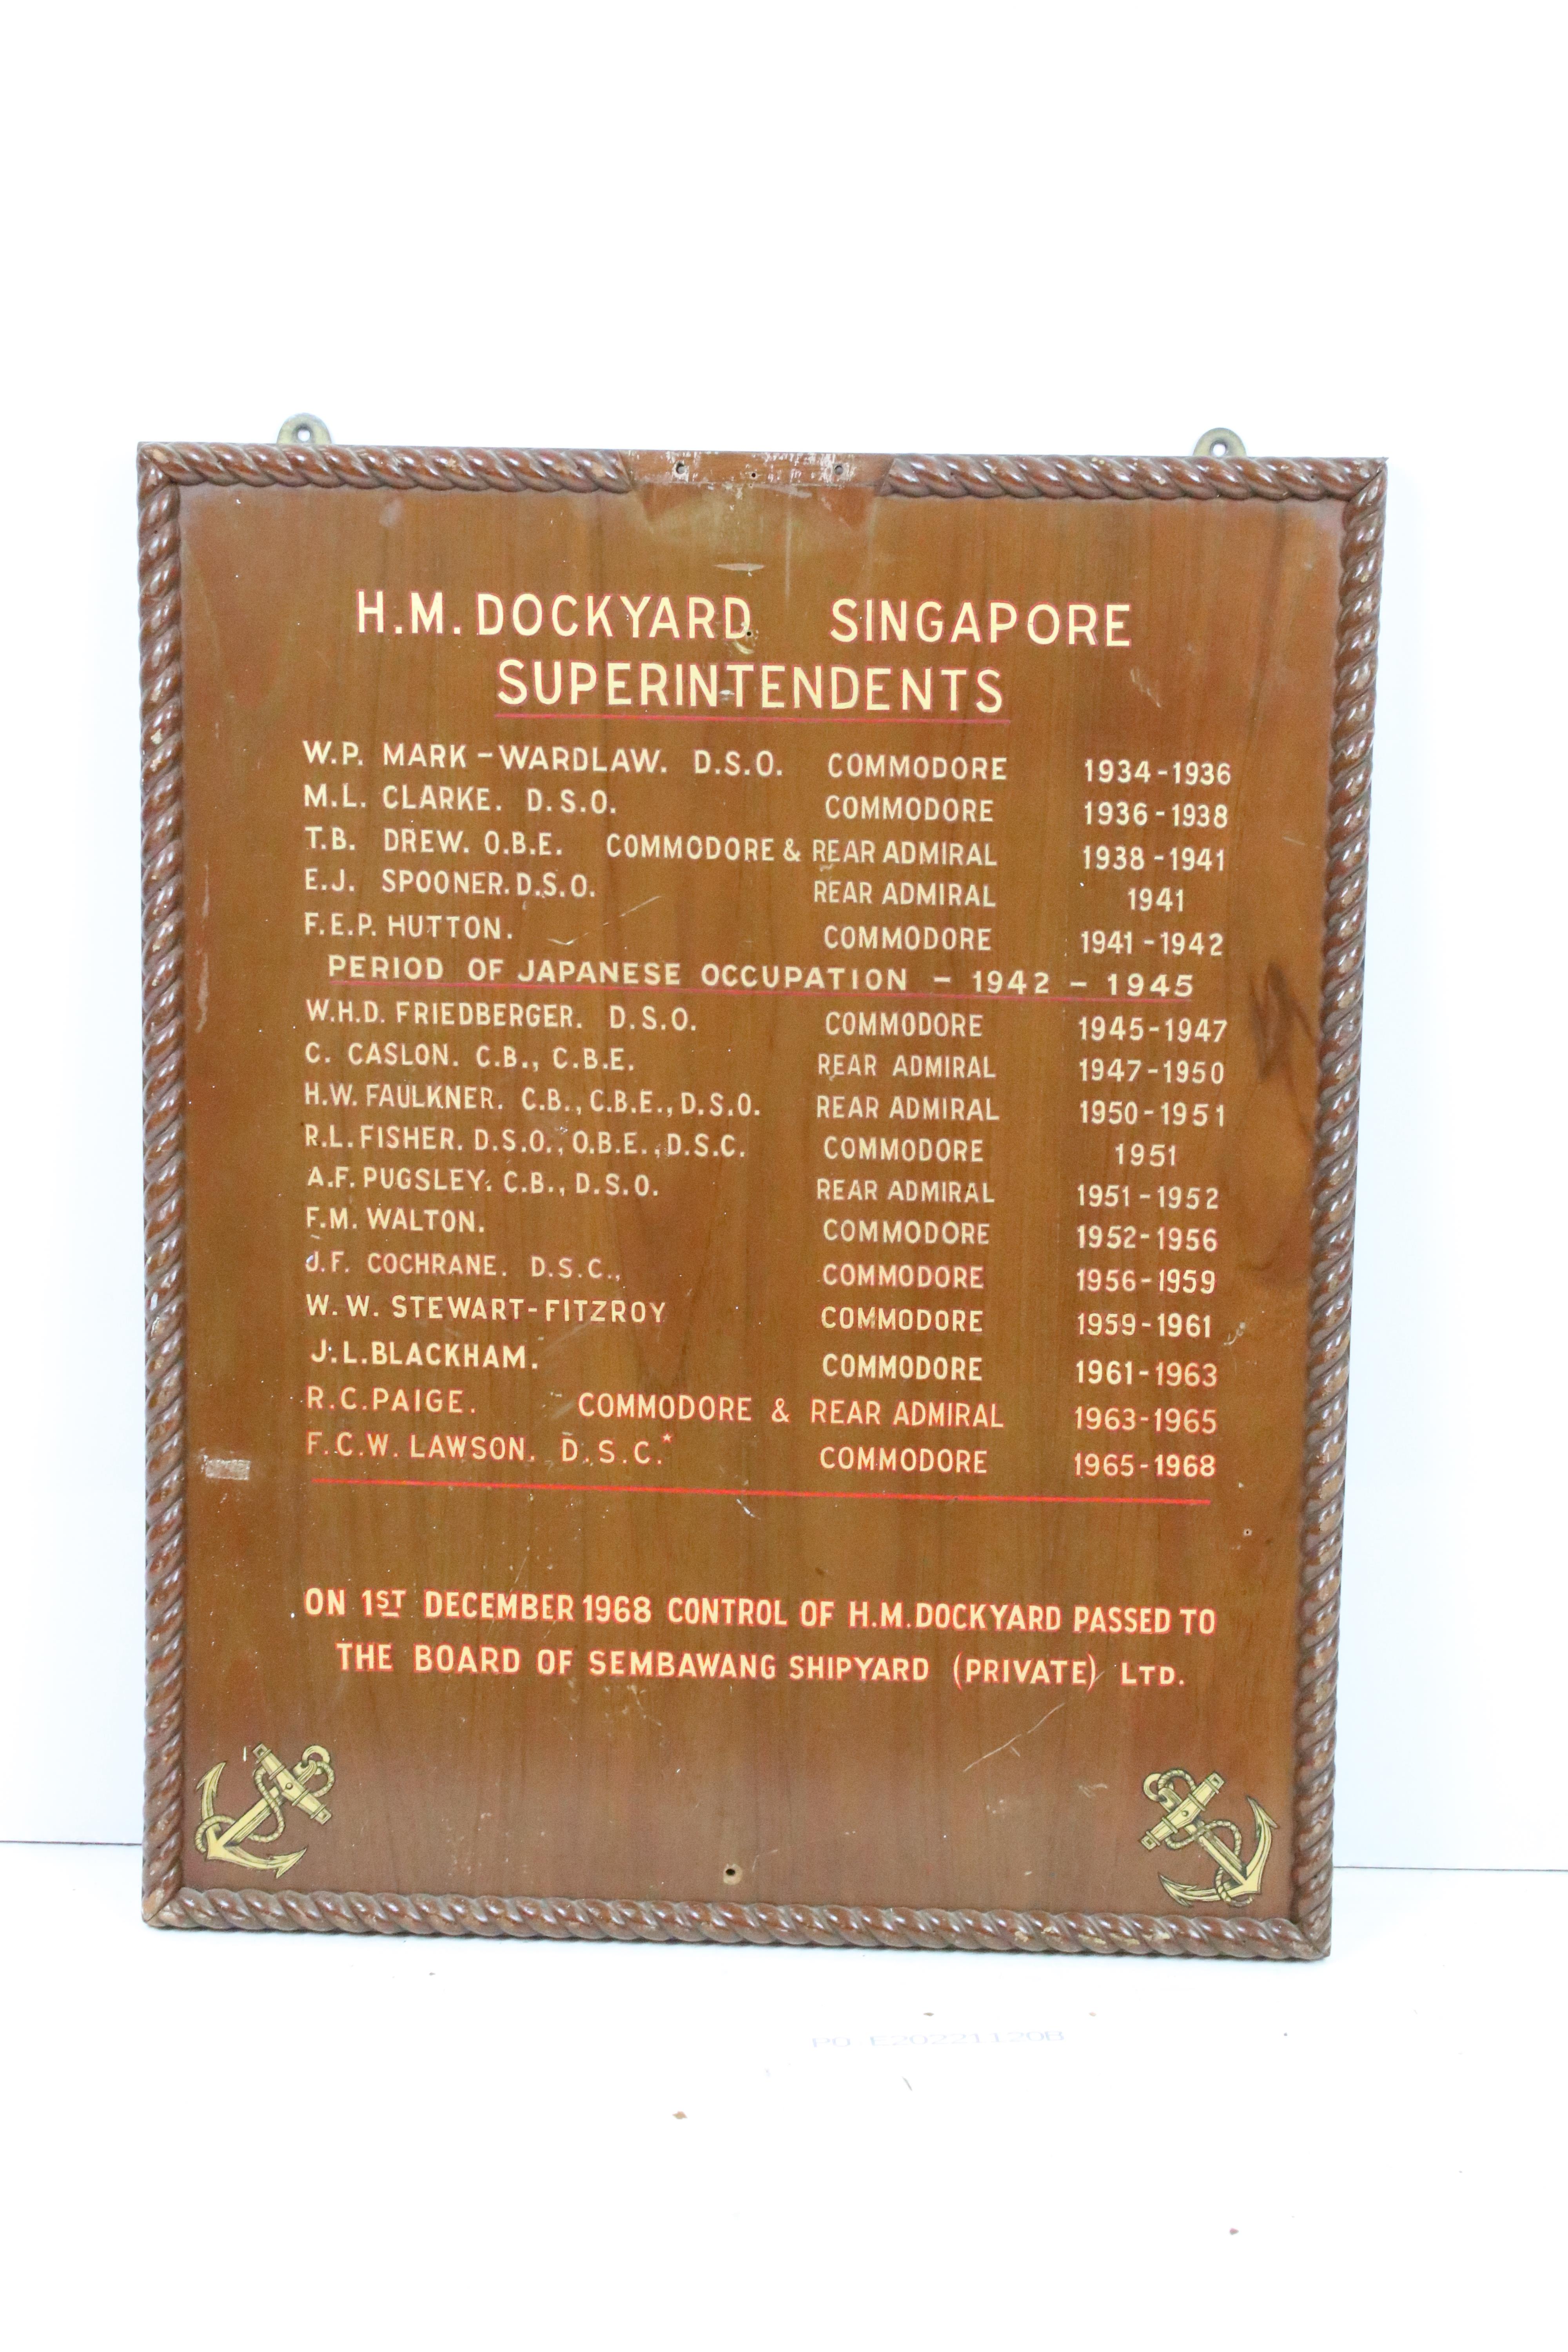 H M Dockyard Singapore 1930s commodore board with painted lettering. Measures 69 x 56cm.